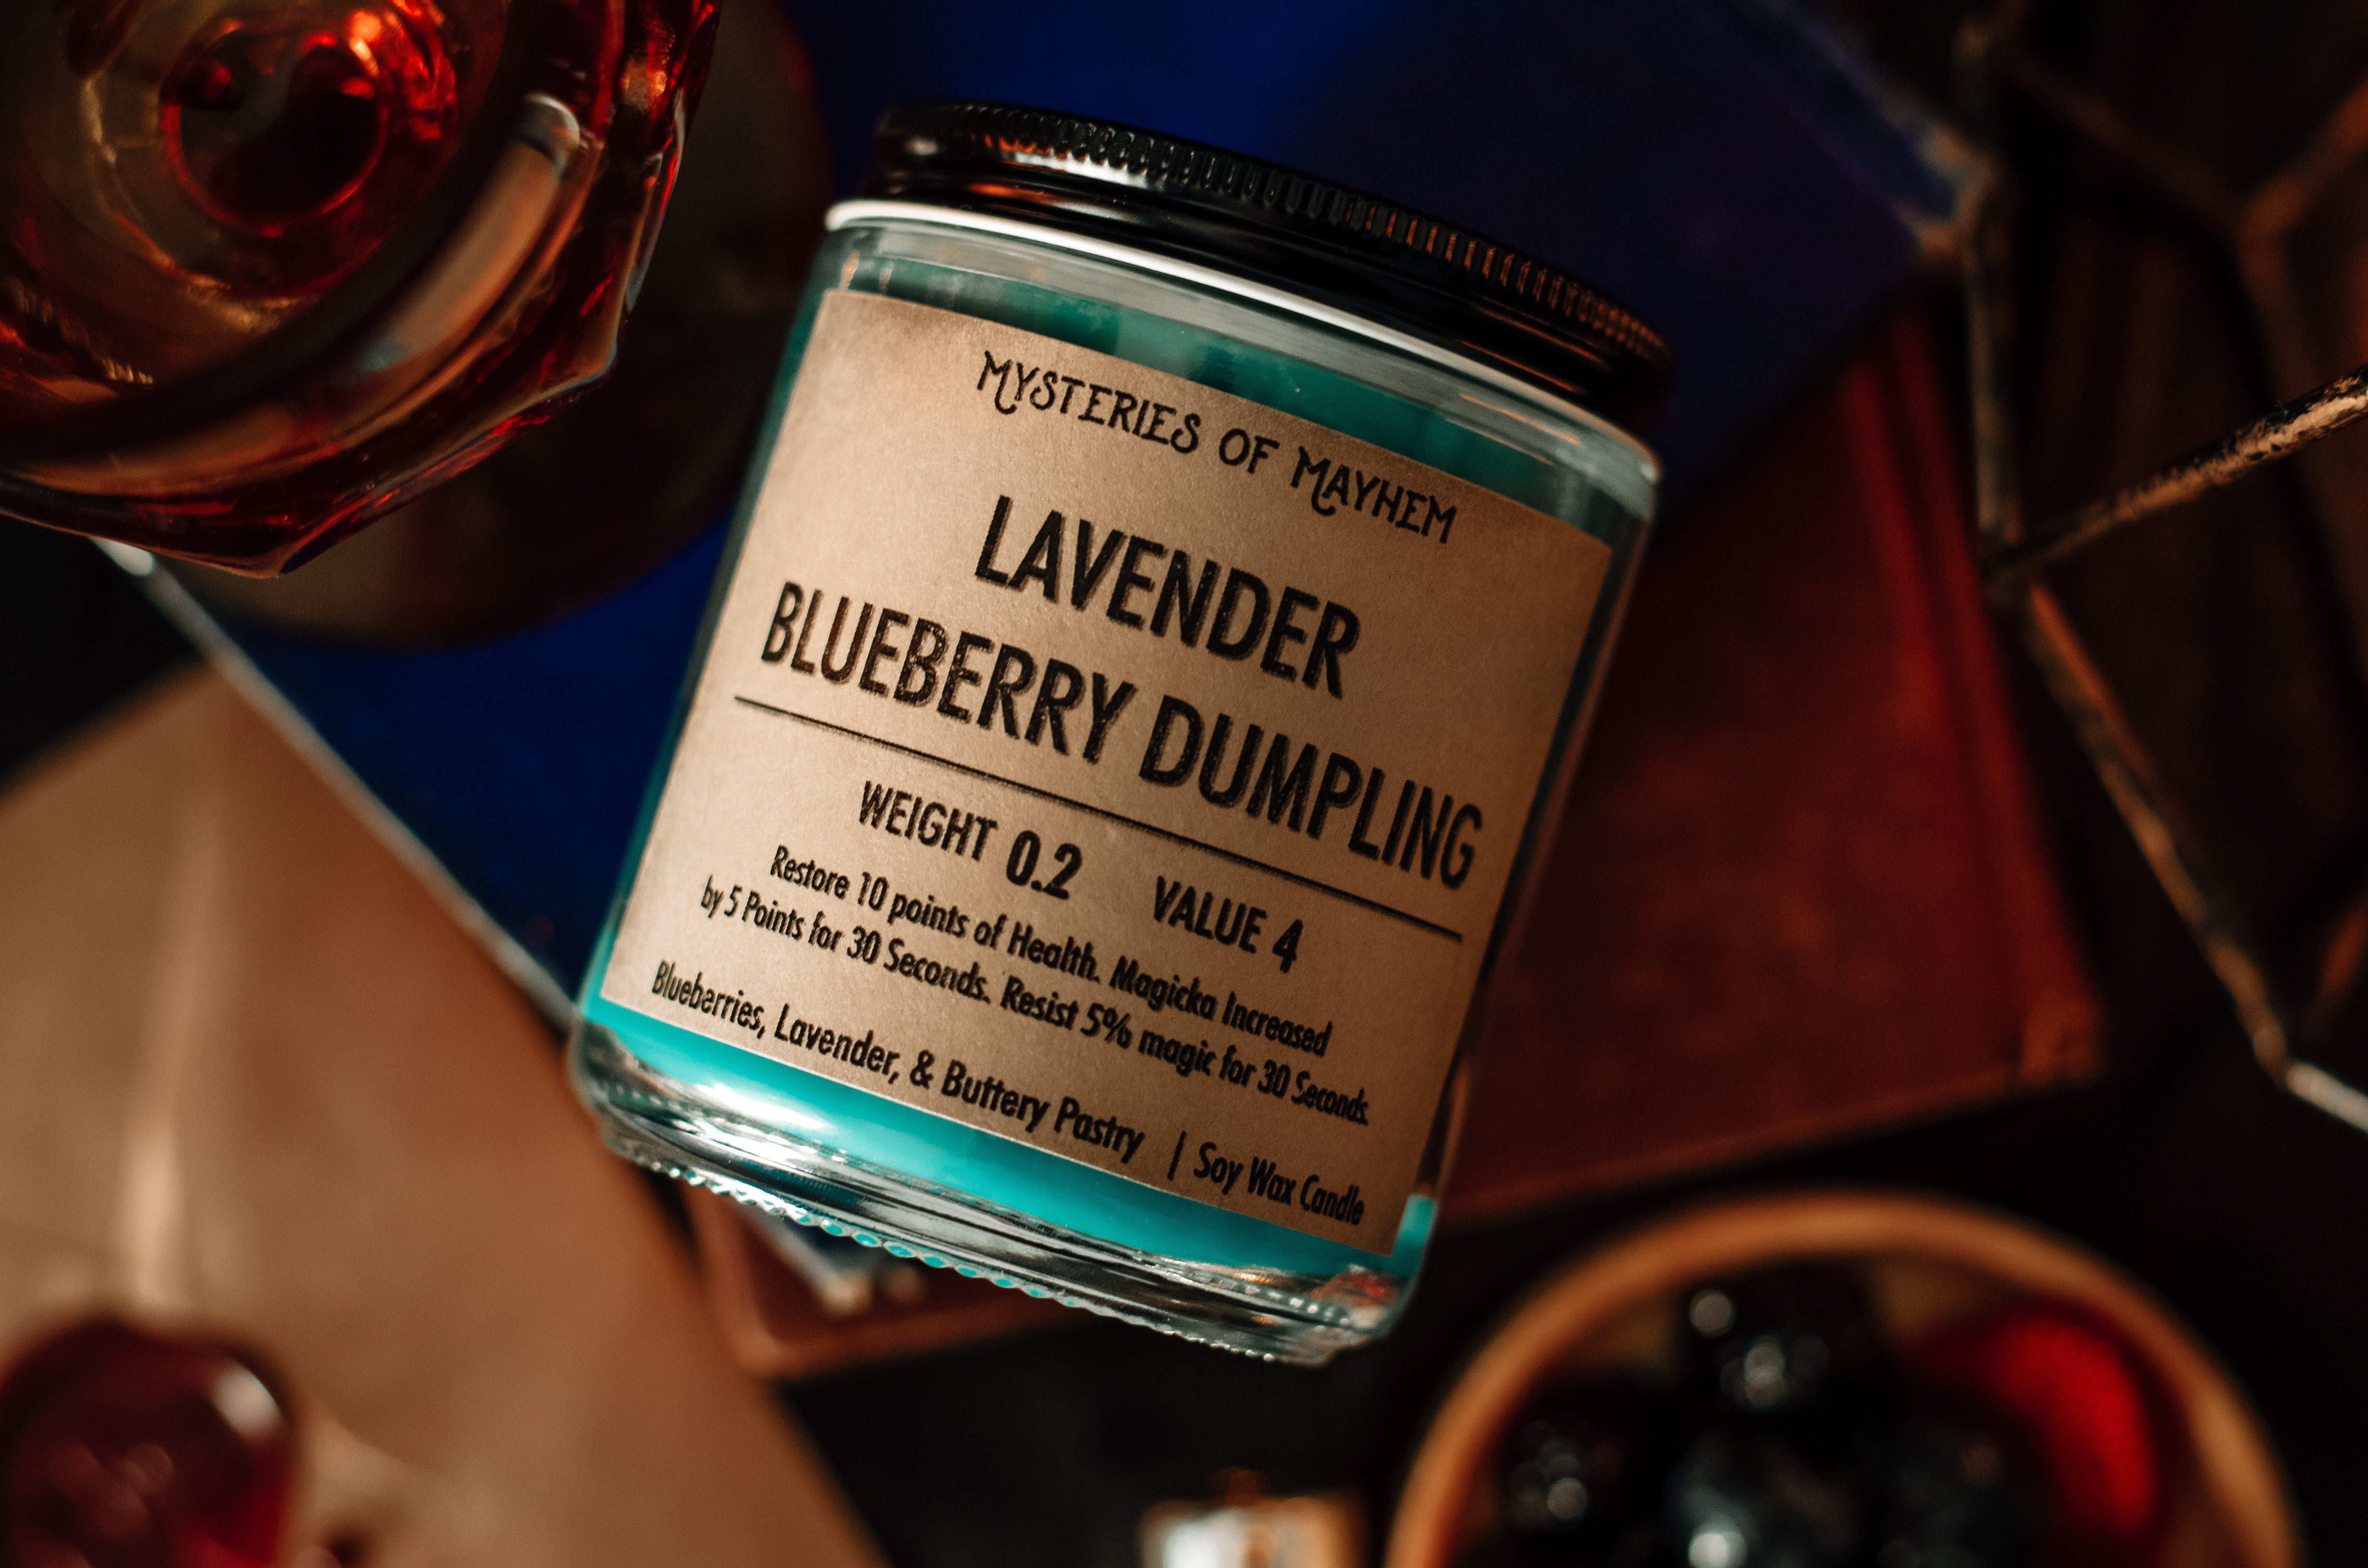 Lavender Blueberry Dumpling - Blueberries, Lavender, and Buttery Pastry Scented with Lavender Essential Oil